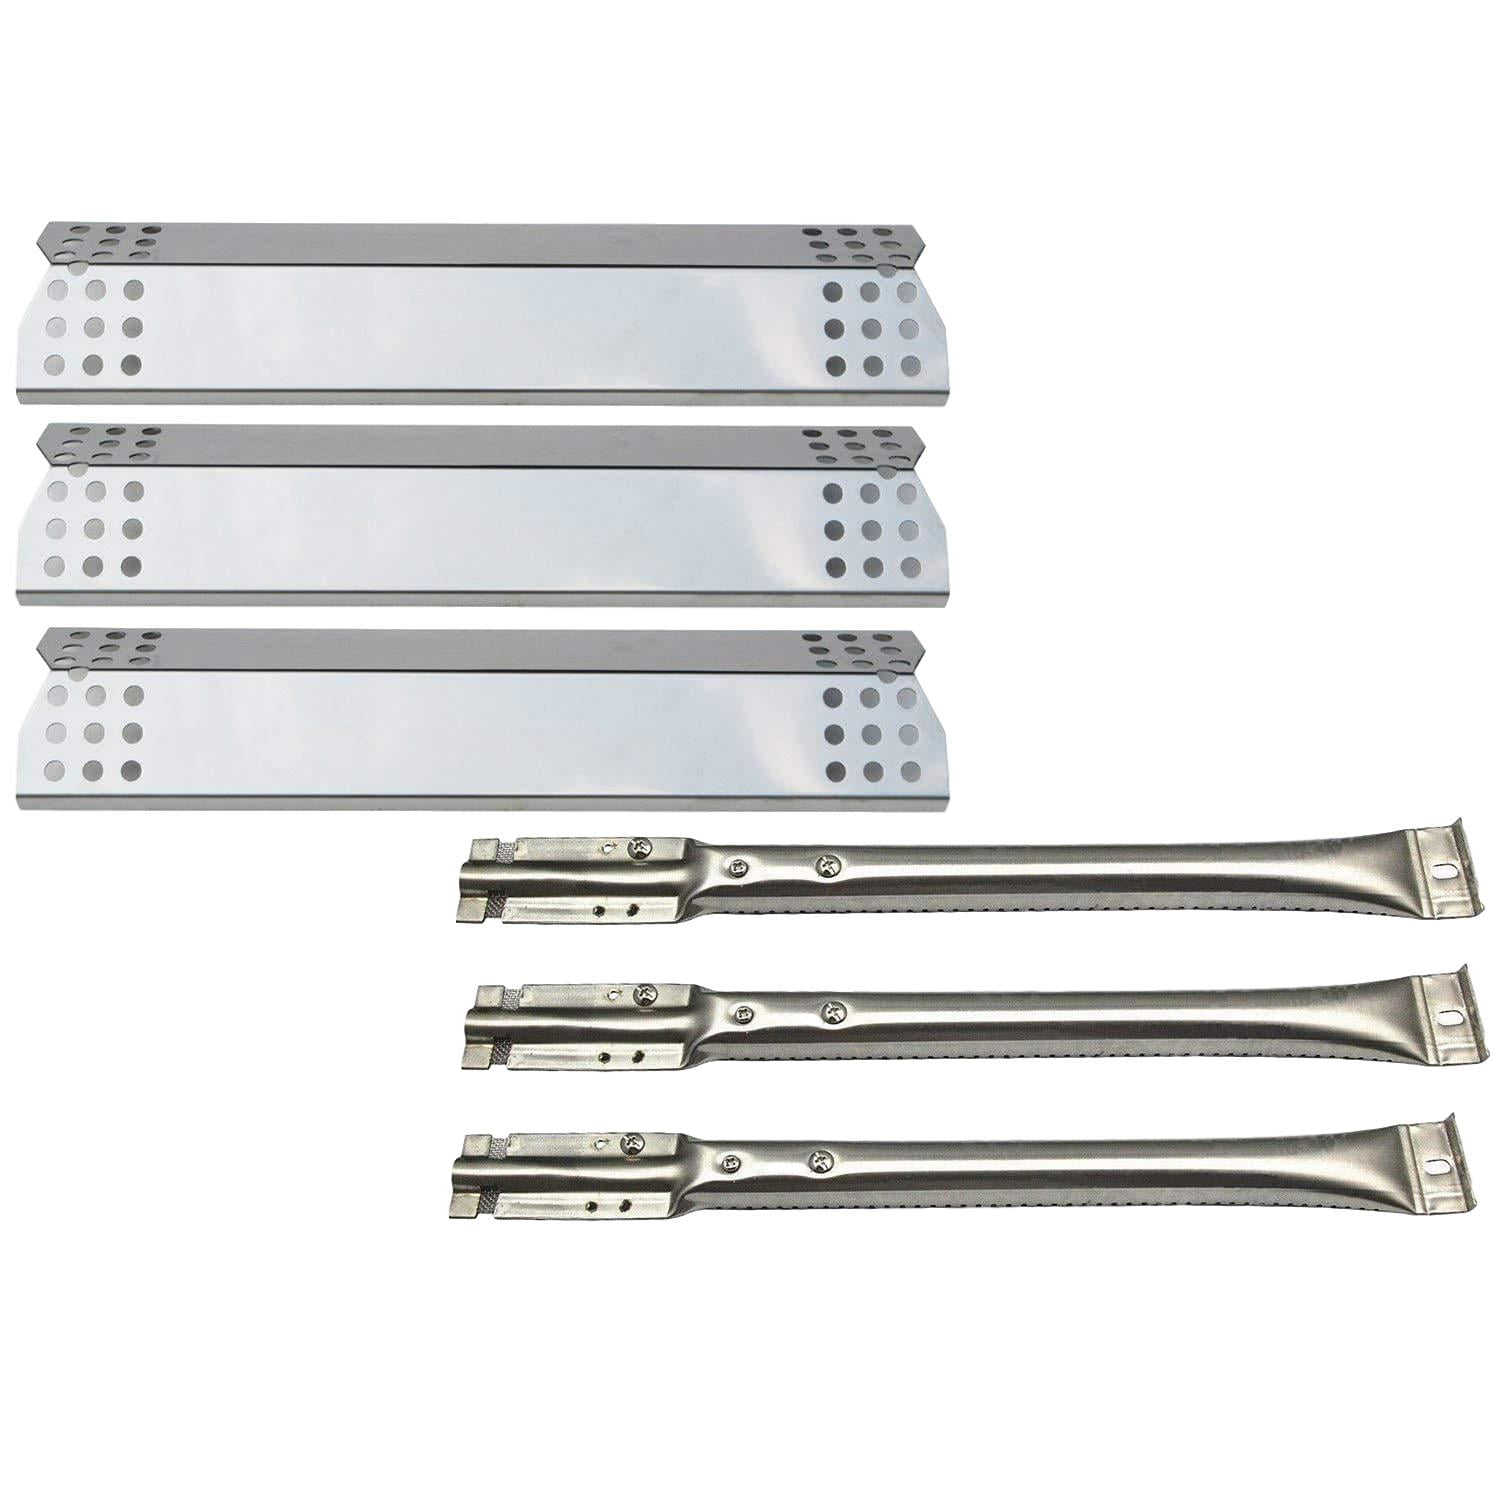 Stainless Steel Burner + Porcelain Steel Heat Plate Direct store Parts Kit DG142 Replacement Sunbeam,Nexgrill,Grill Master 720-0697 Gas Grill Burners,Heat Plates 